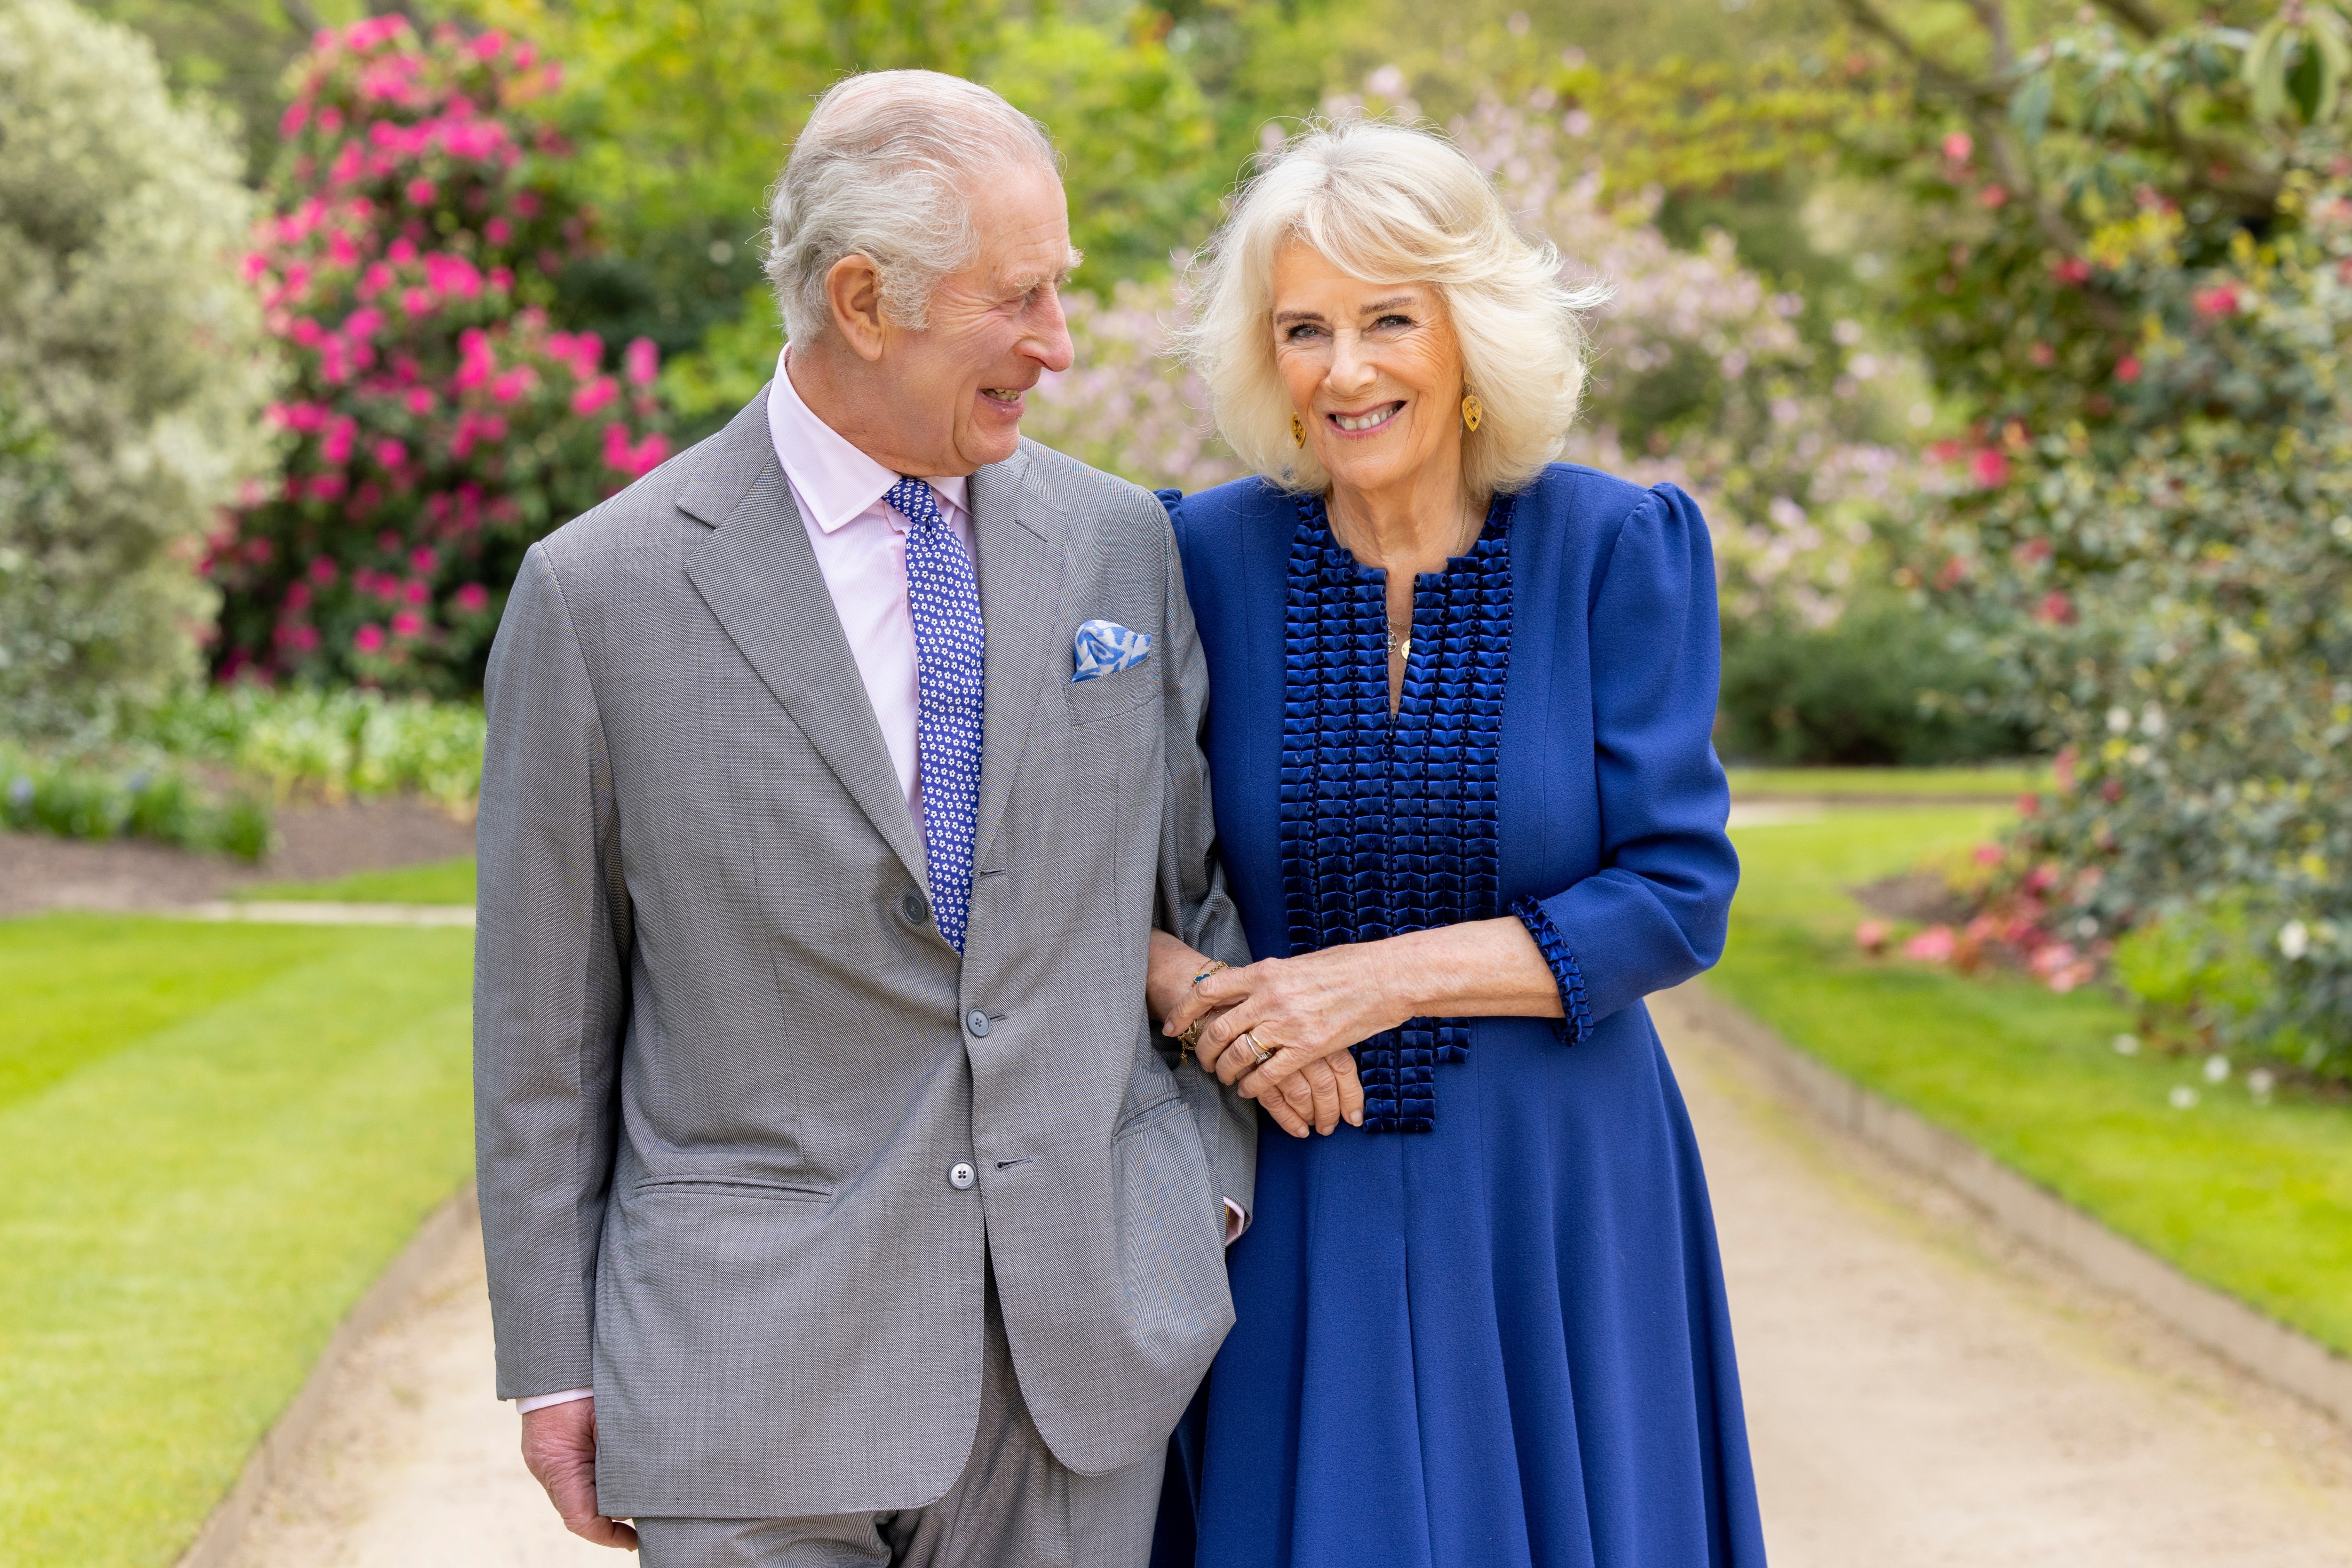 Buckingham Palace released this picture of the King and Queen, taken on April 10 in the palace gardens